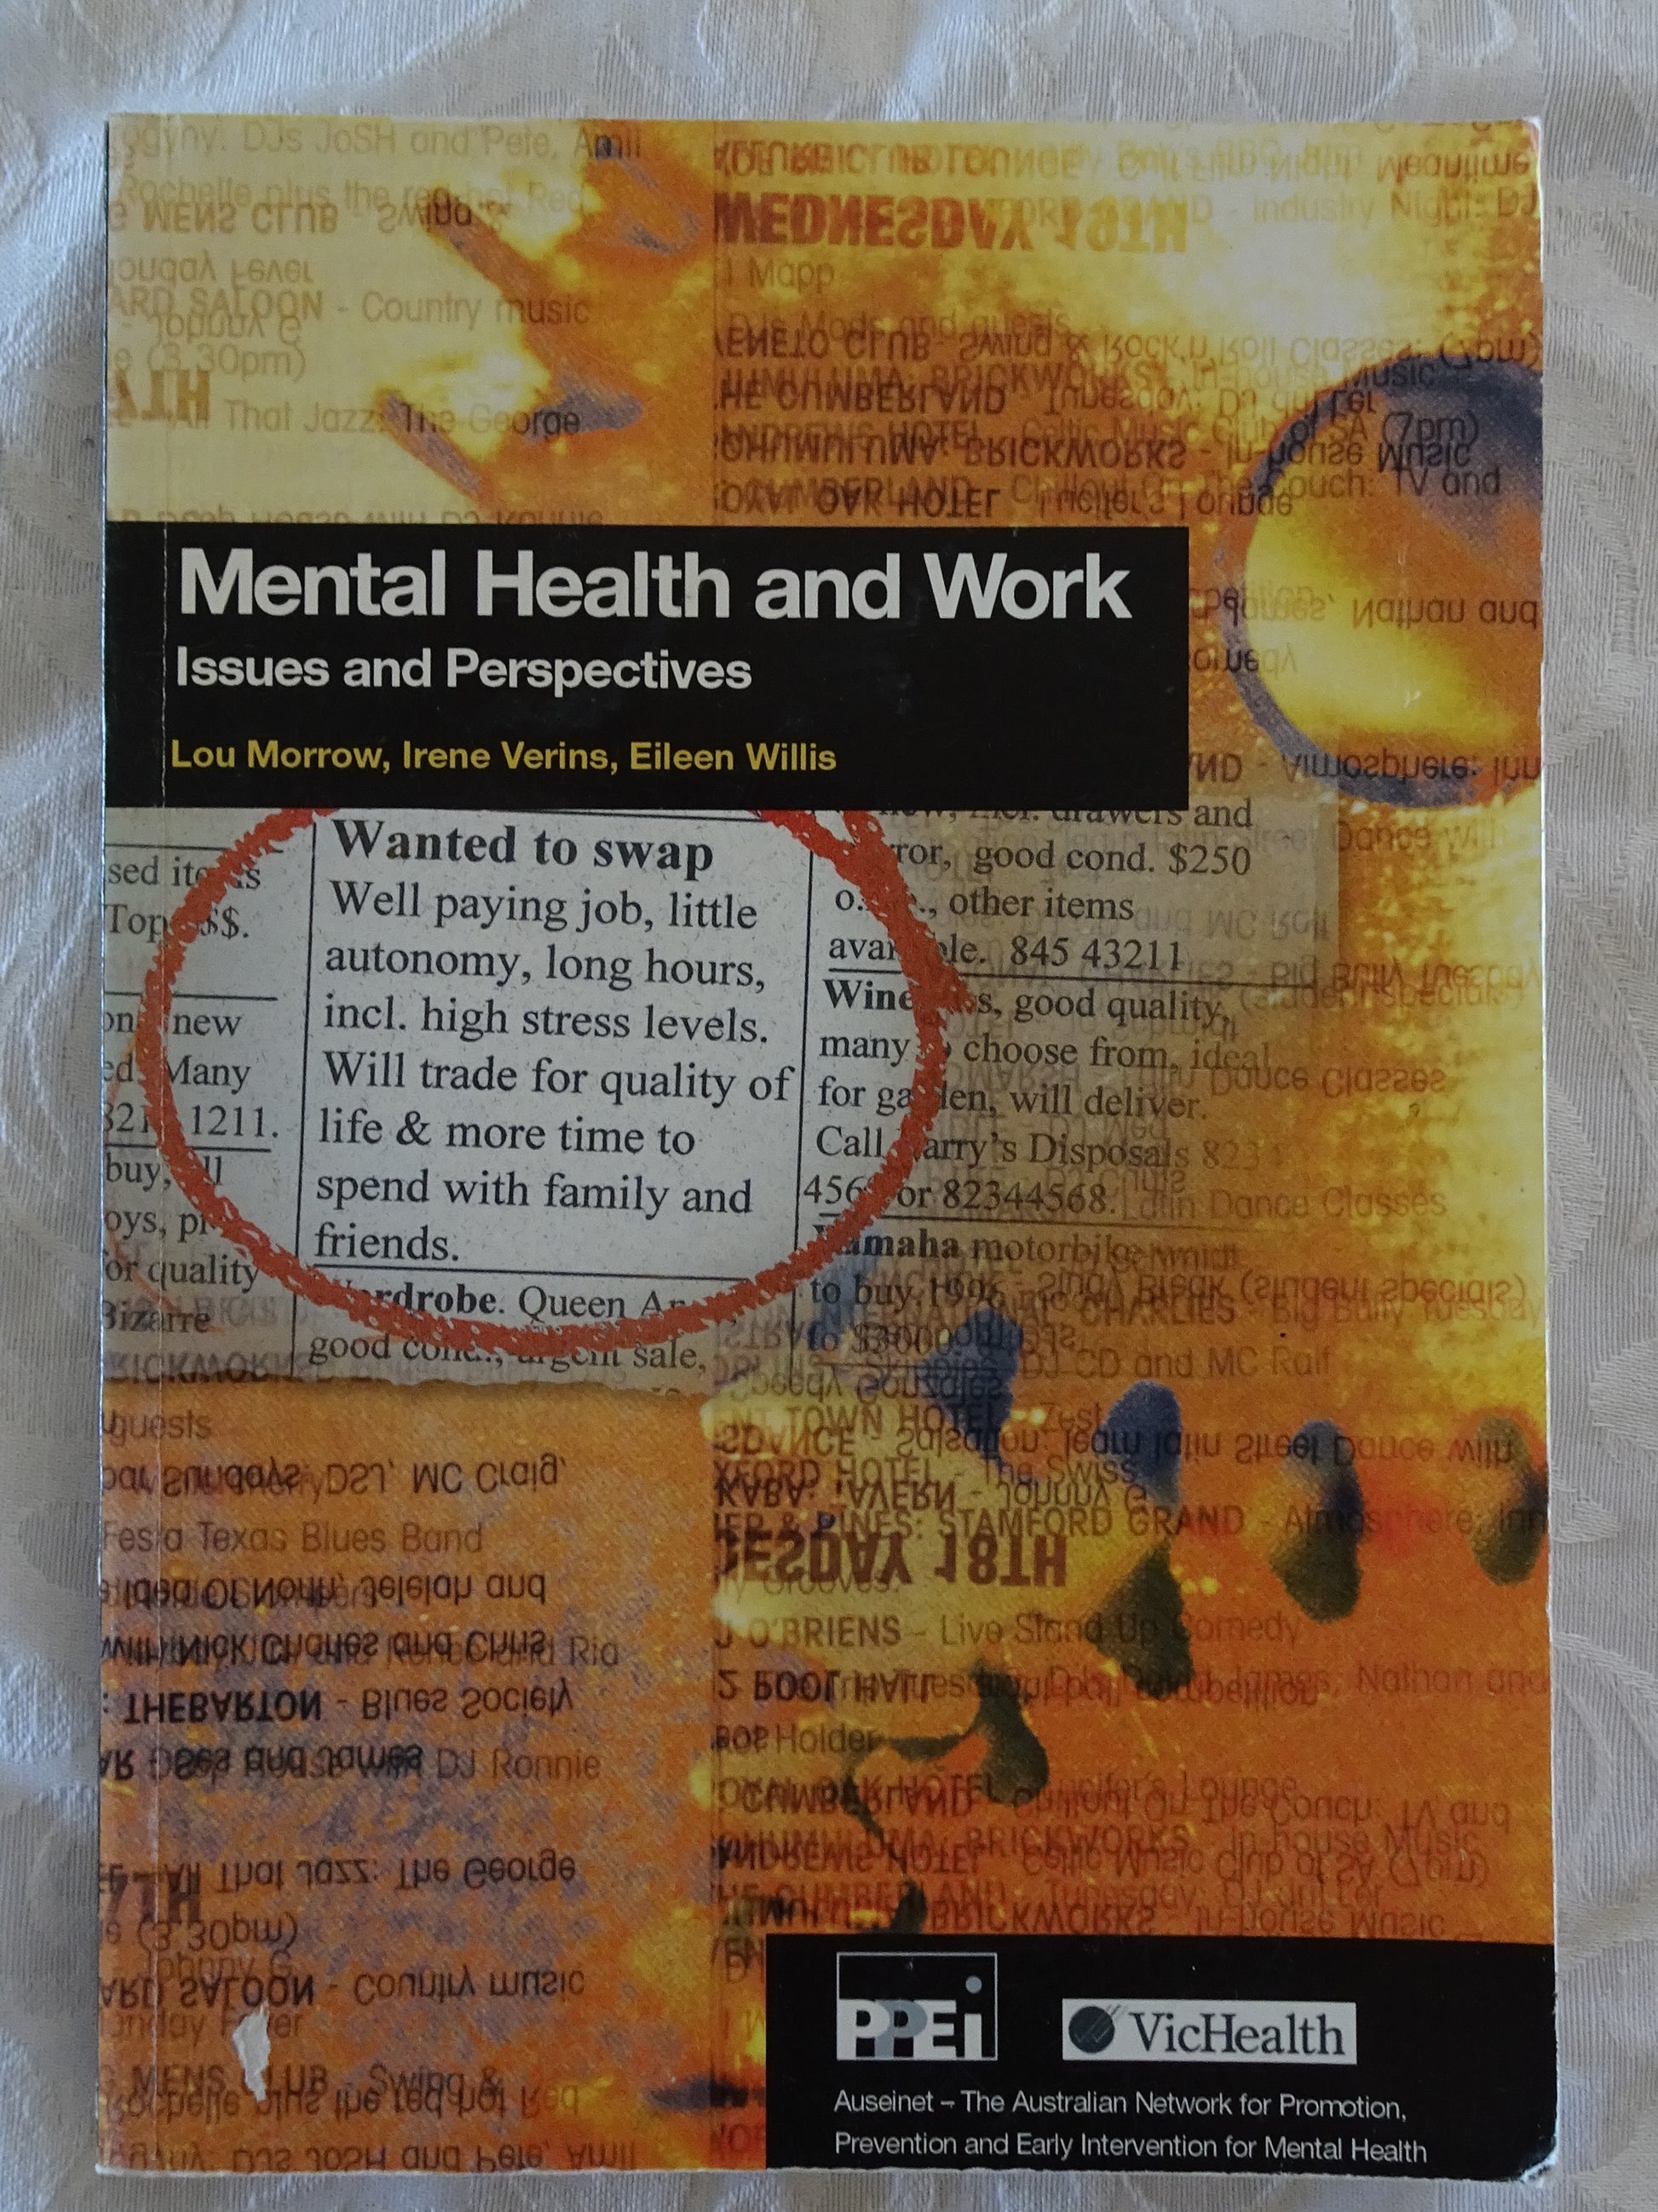 Mental Health and Work  Issues and Perspectives  Edited by Lou Morrow, Irene Verins, Eileen Willis